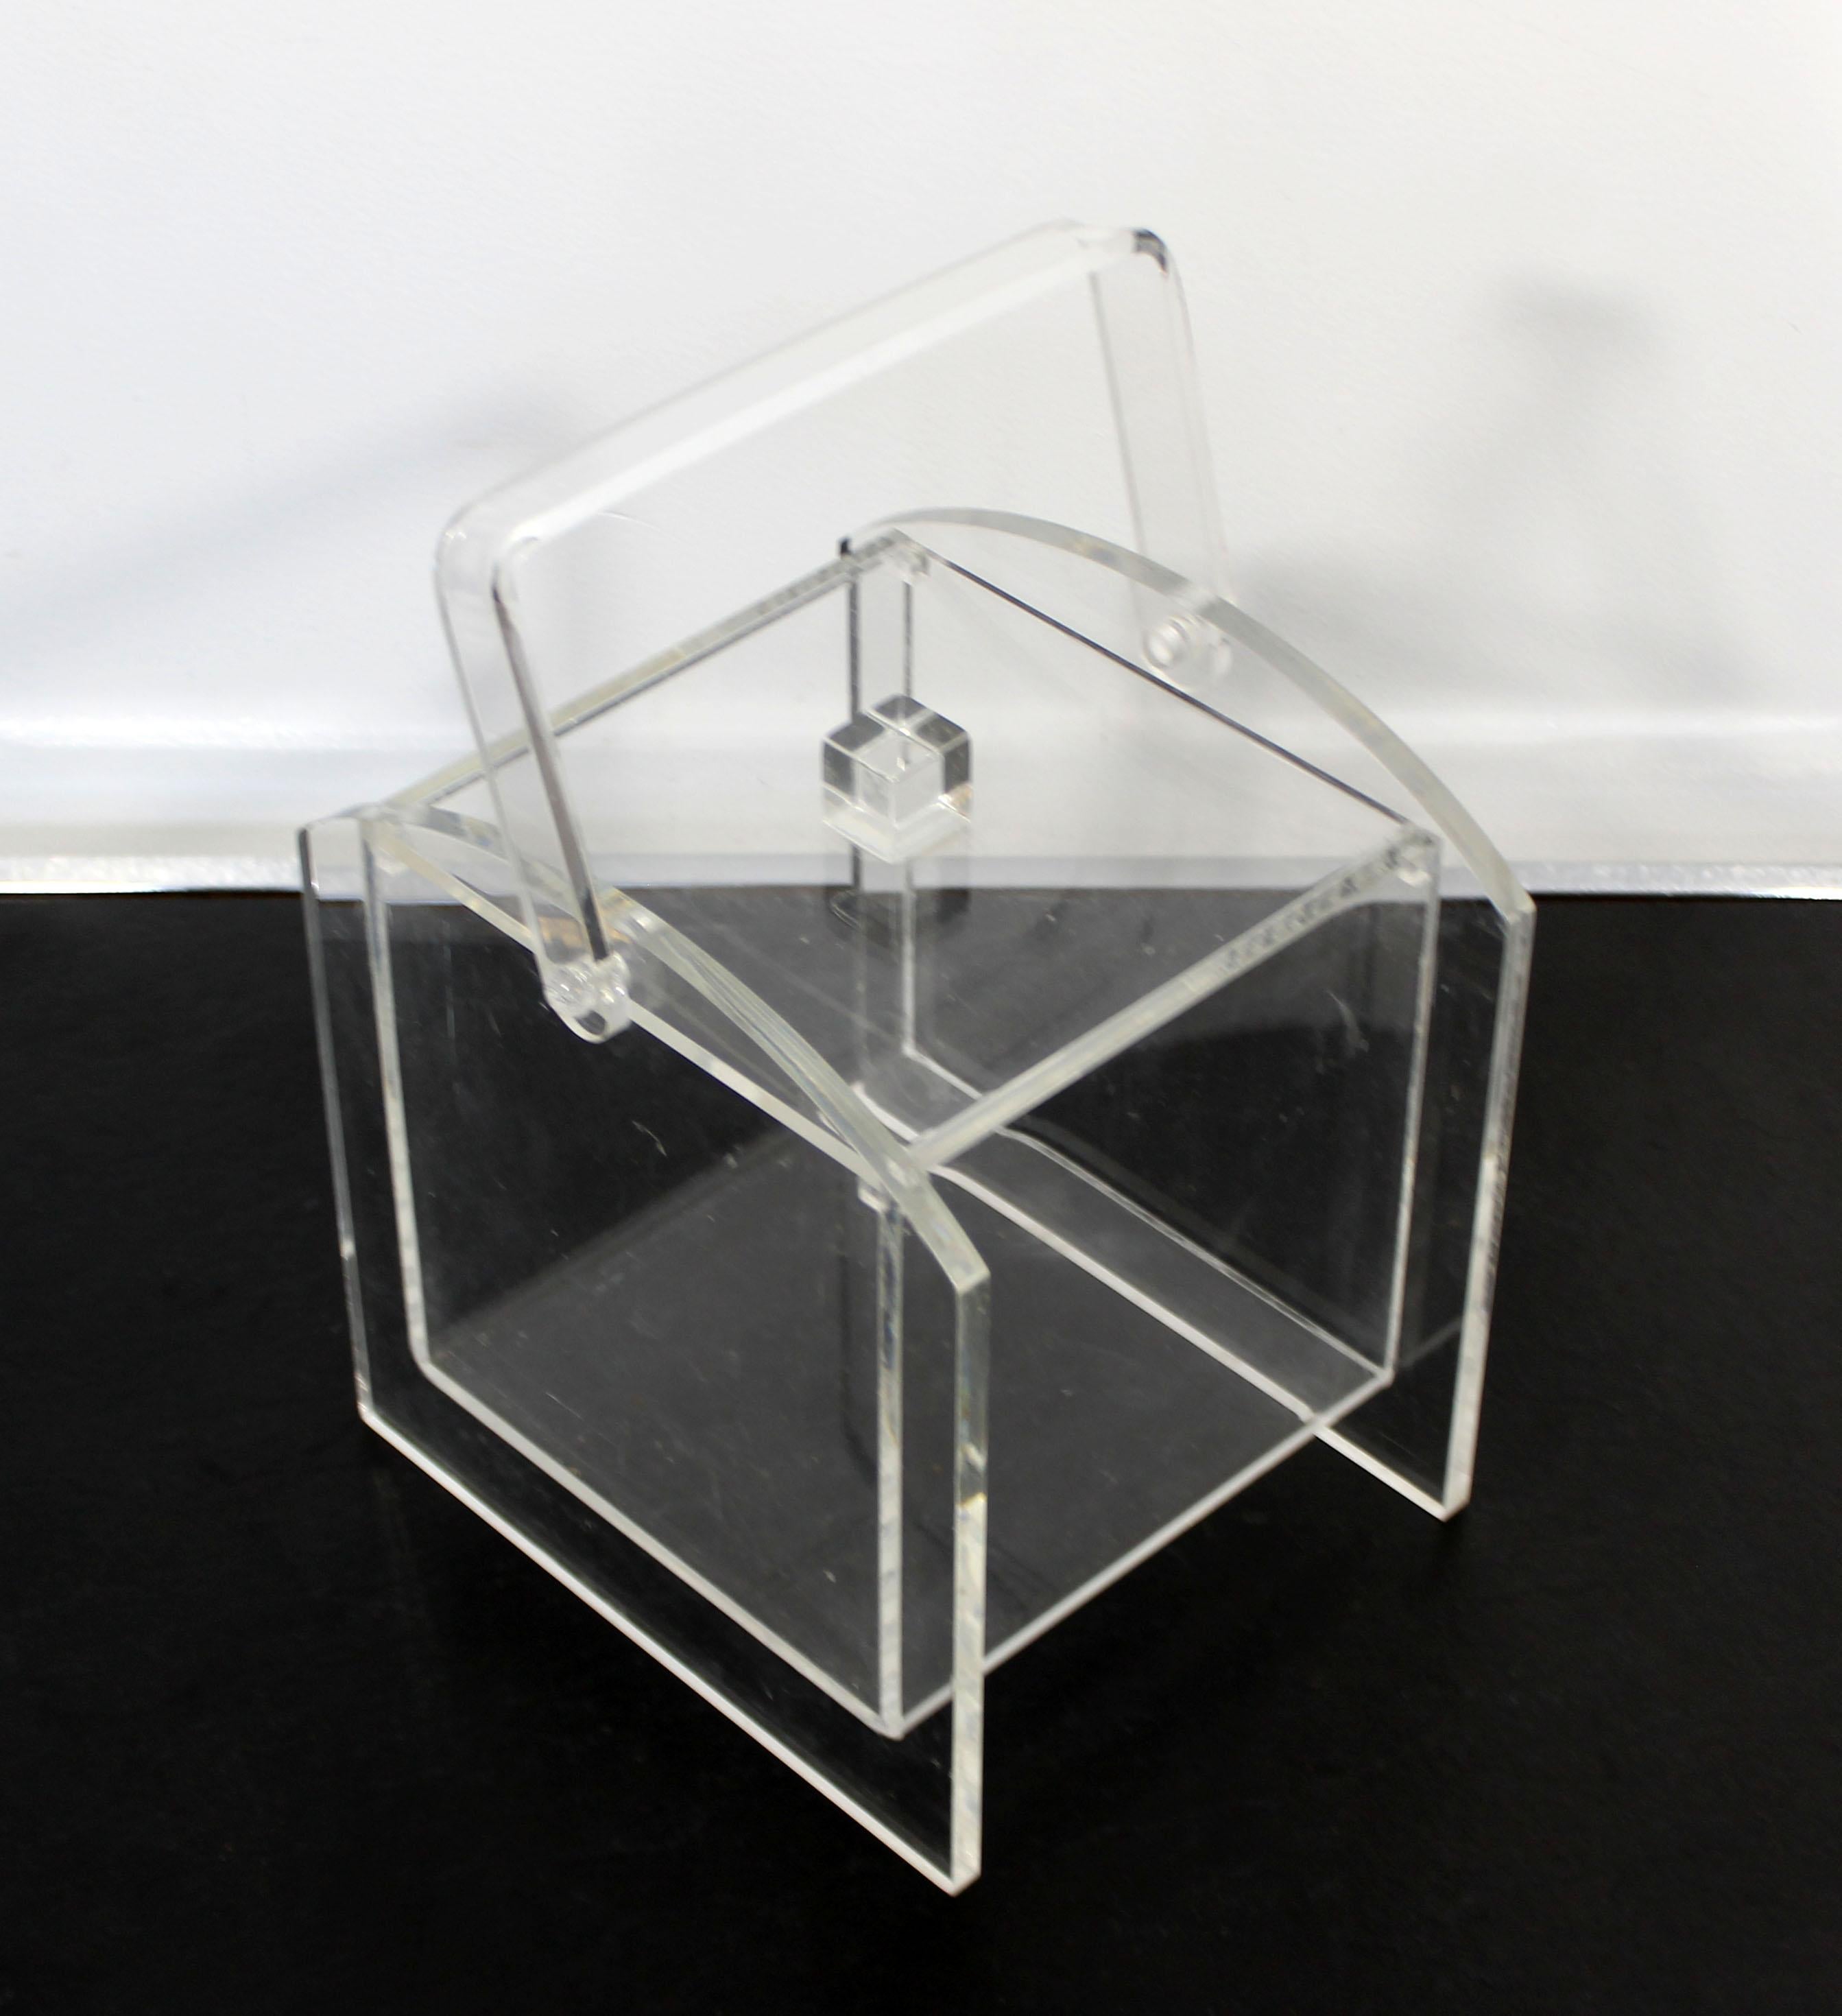 For your consideration is a simply chic tissue box holder, with handle, made of clear Lucite, circa the 1970s. In very good vintage condition. The dimensions are 8